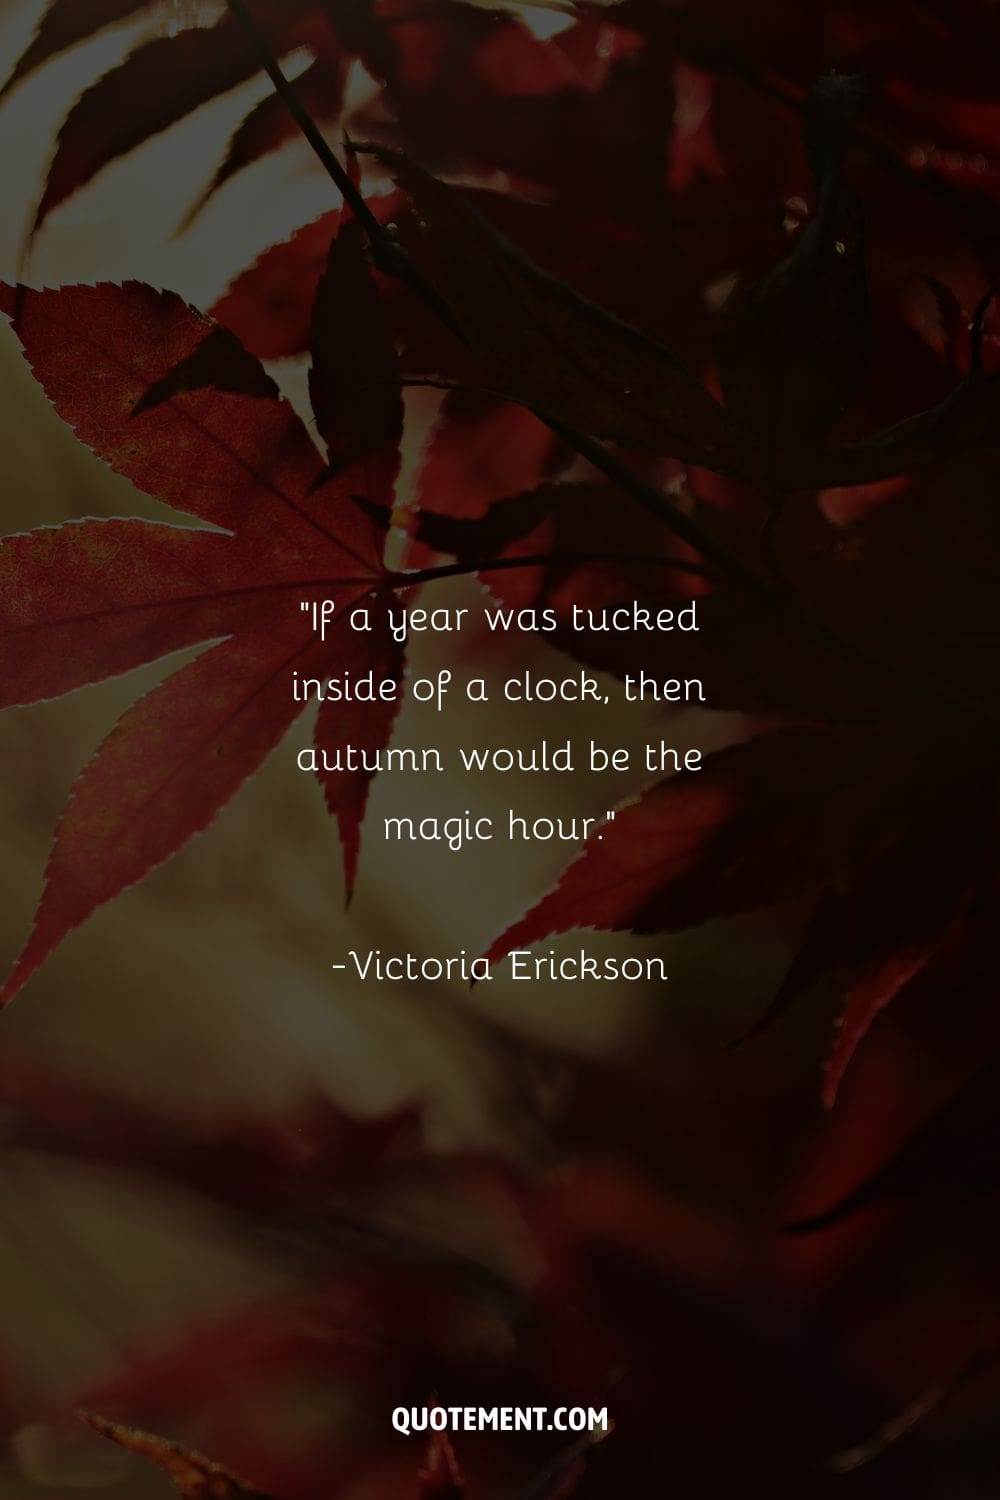 Image of yellow leaves representing the cutest fall quote.